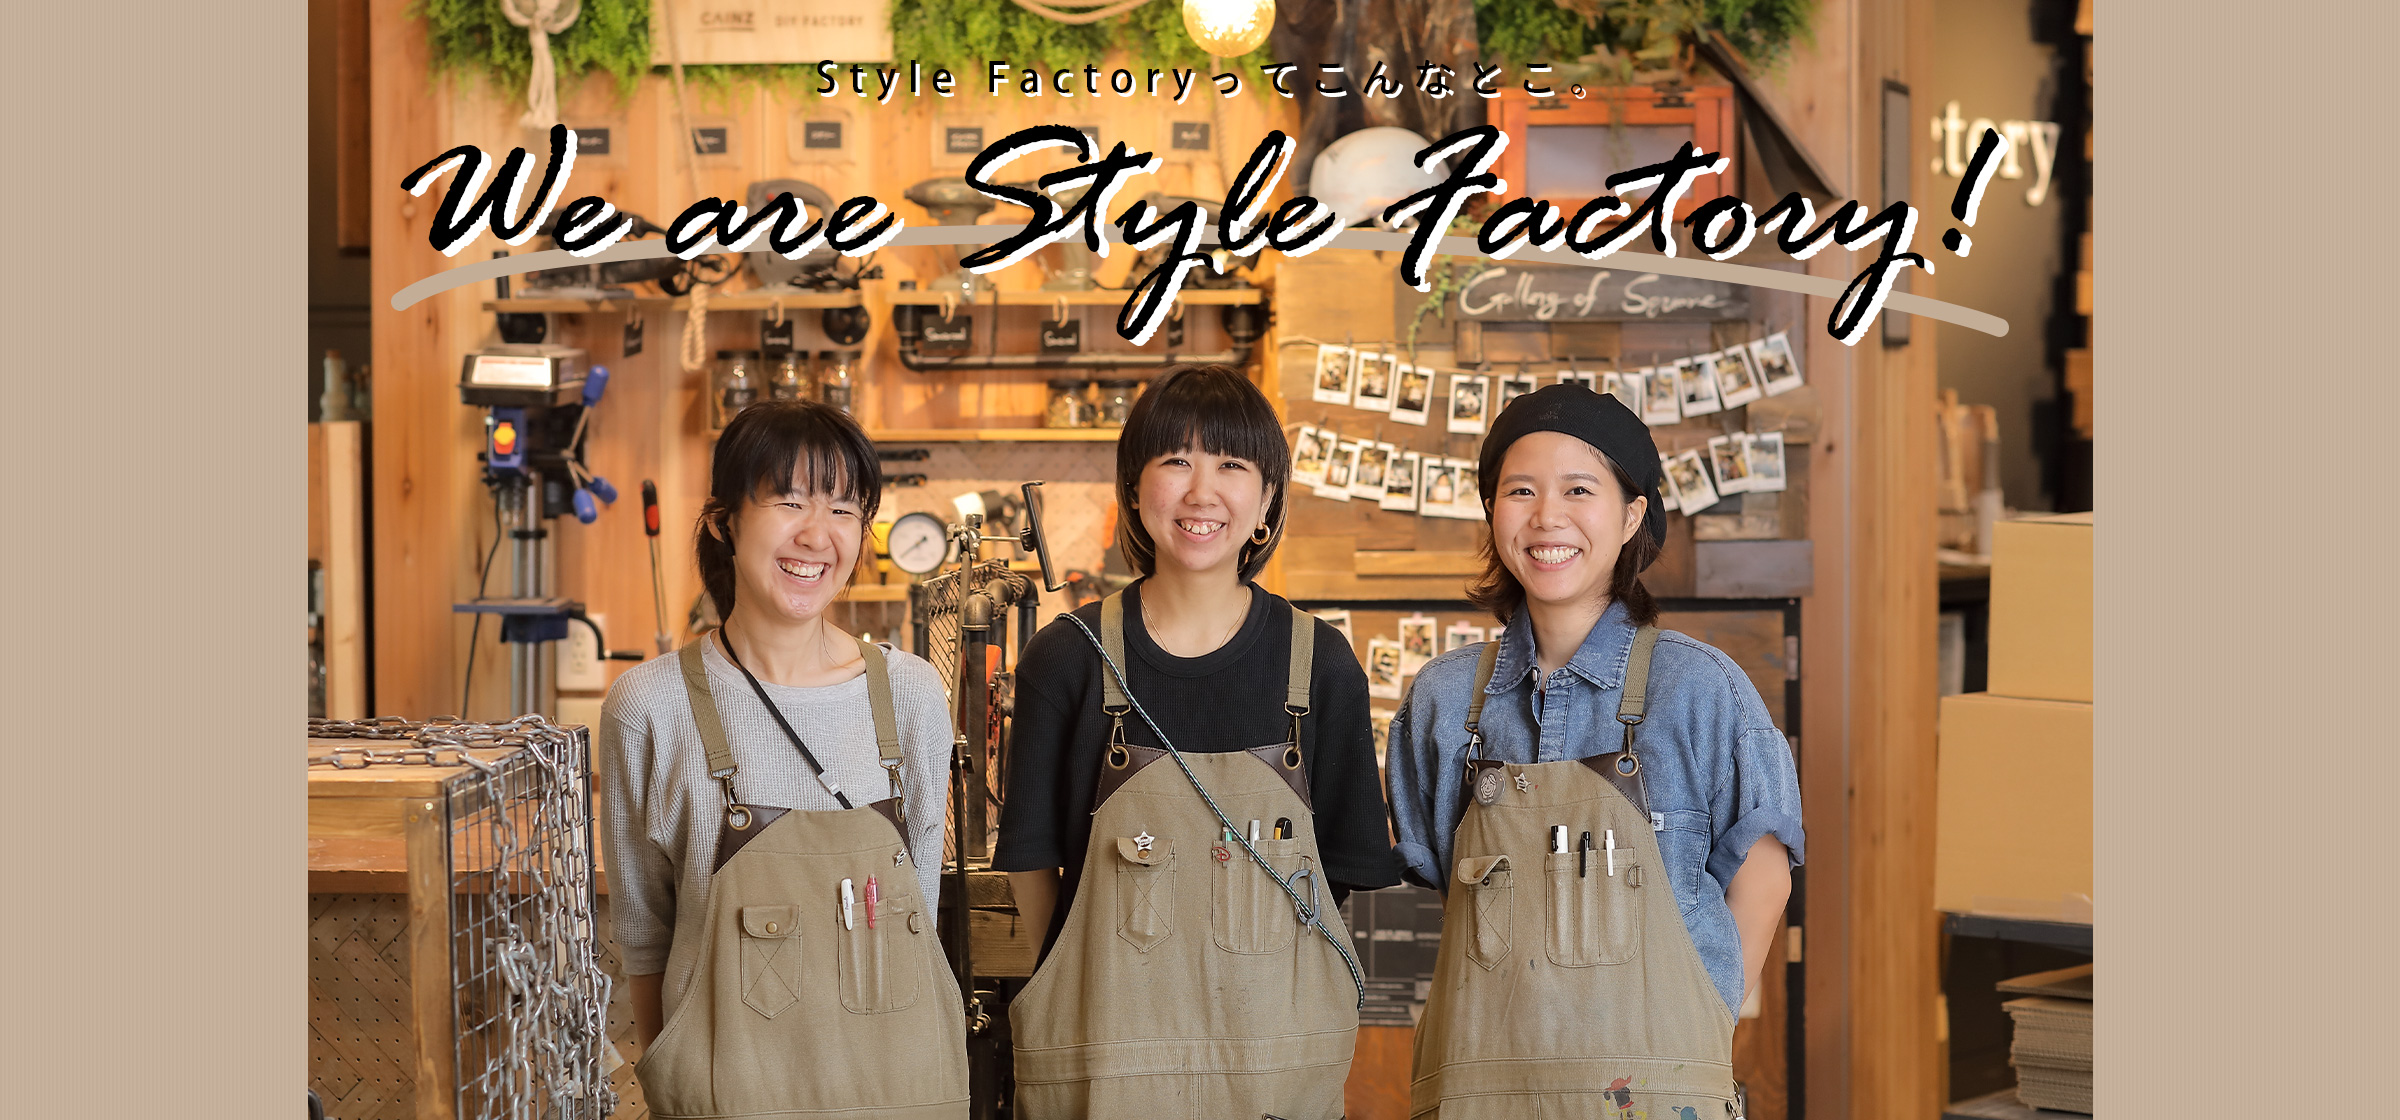 We are Style Factory！ Vol.1　Style Factoryってどんなところ？お店の魅力徹底紹介店舗内風景